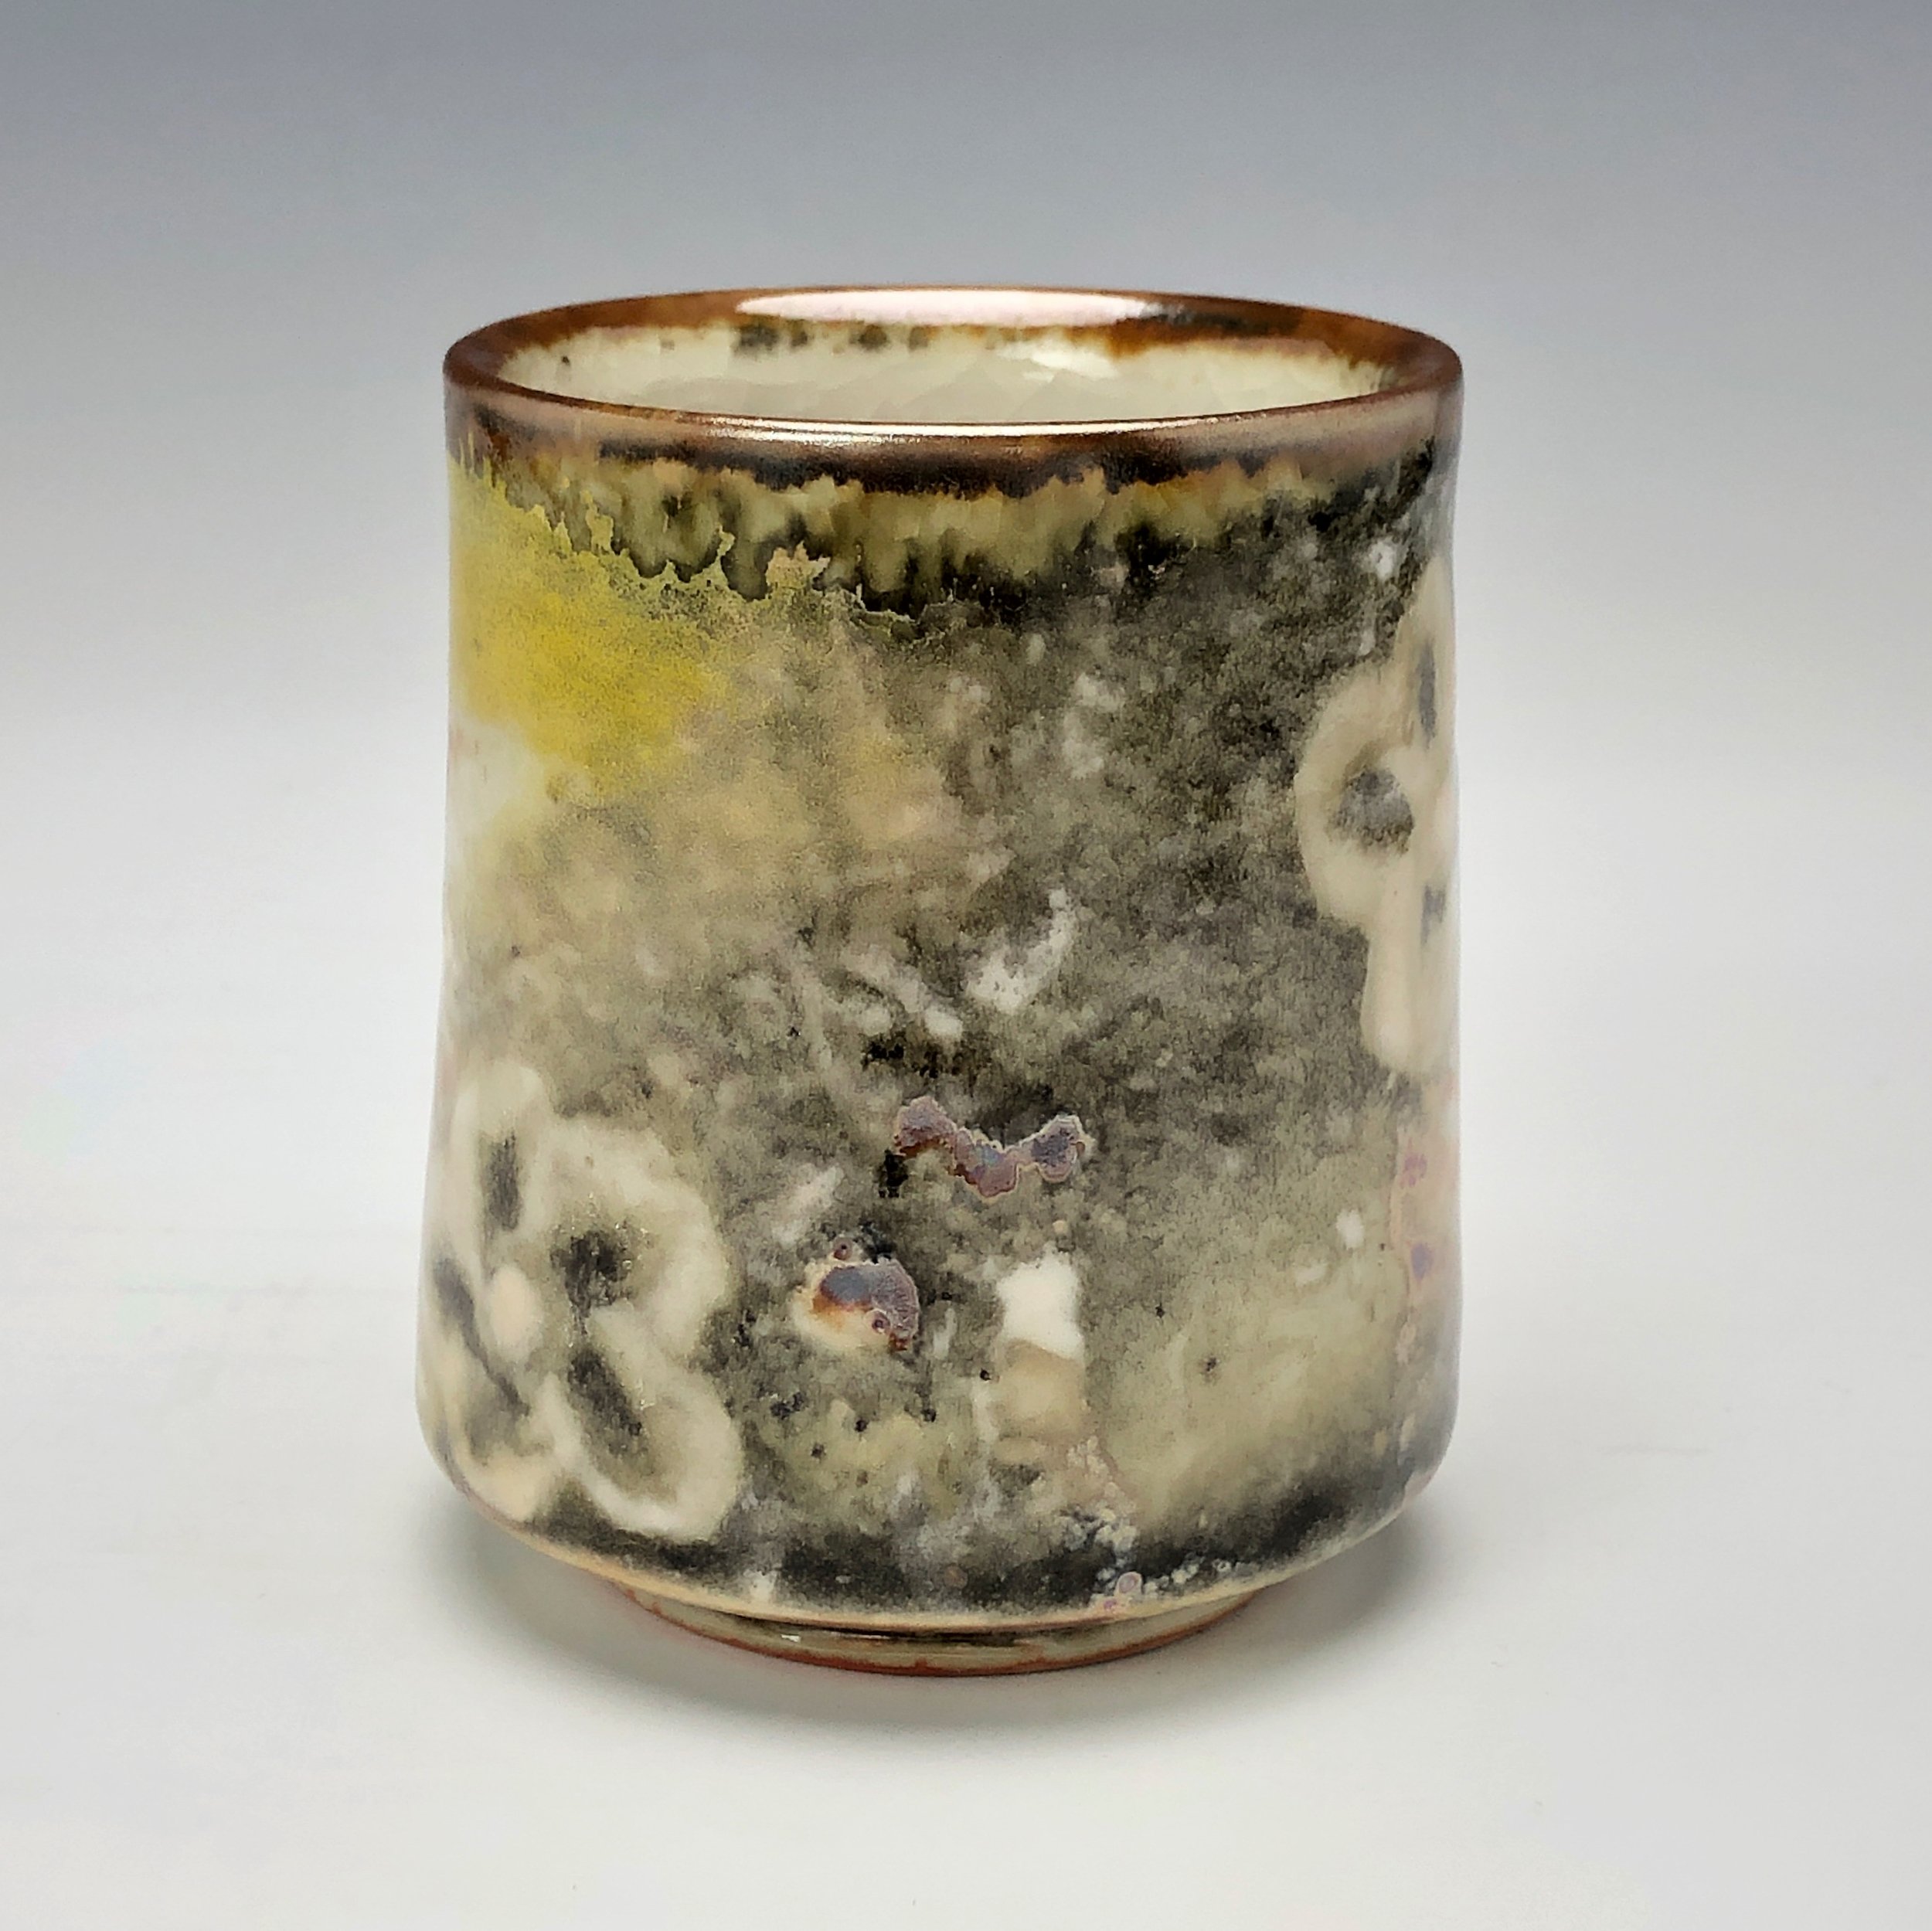  Bruce Gholson, Bulldog Pottery, Seagrove, North Carolina   Yunomi 5  - Casual drinking cup made from porcelain with Iron Luster Fish. Ceramic cup also has swipes of yellow and blue. A textural shino is also glazed onto the some areas of the cup’s su